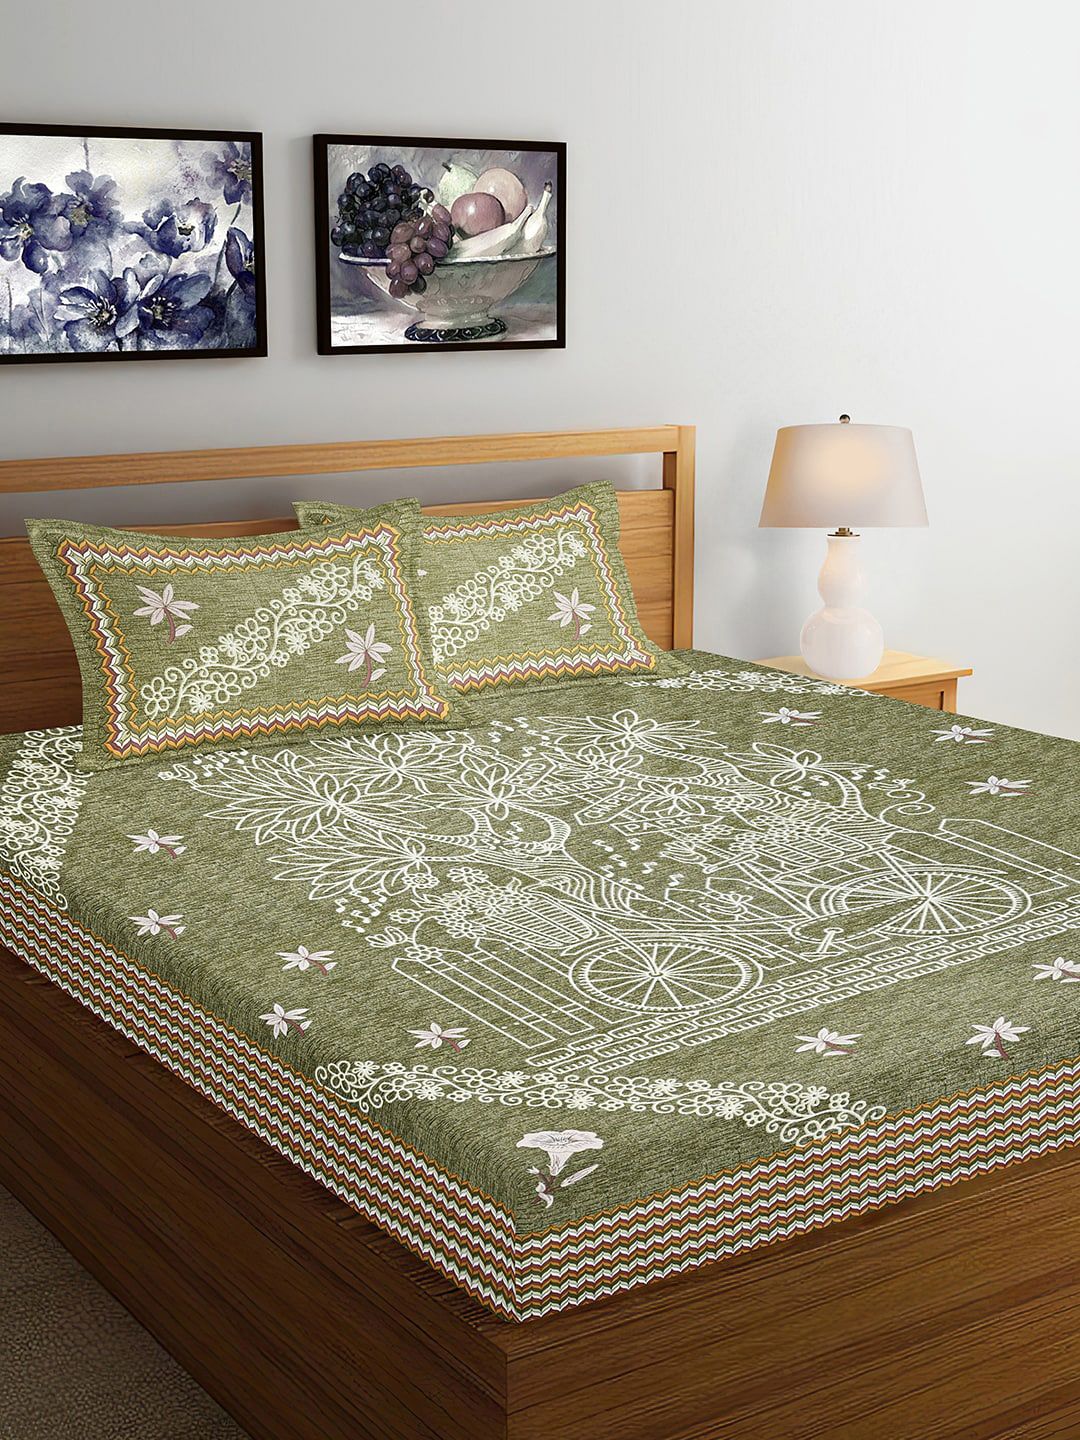 Ispace Olive AROMA 120 TC Cotton Jaipuri King Bedsheet With 2 Pillow Covers Price in India